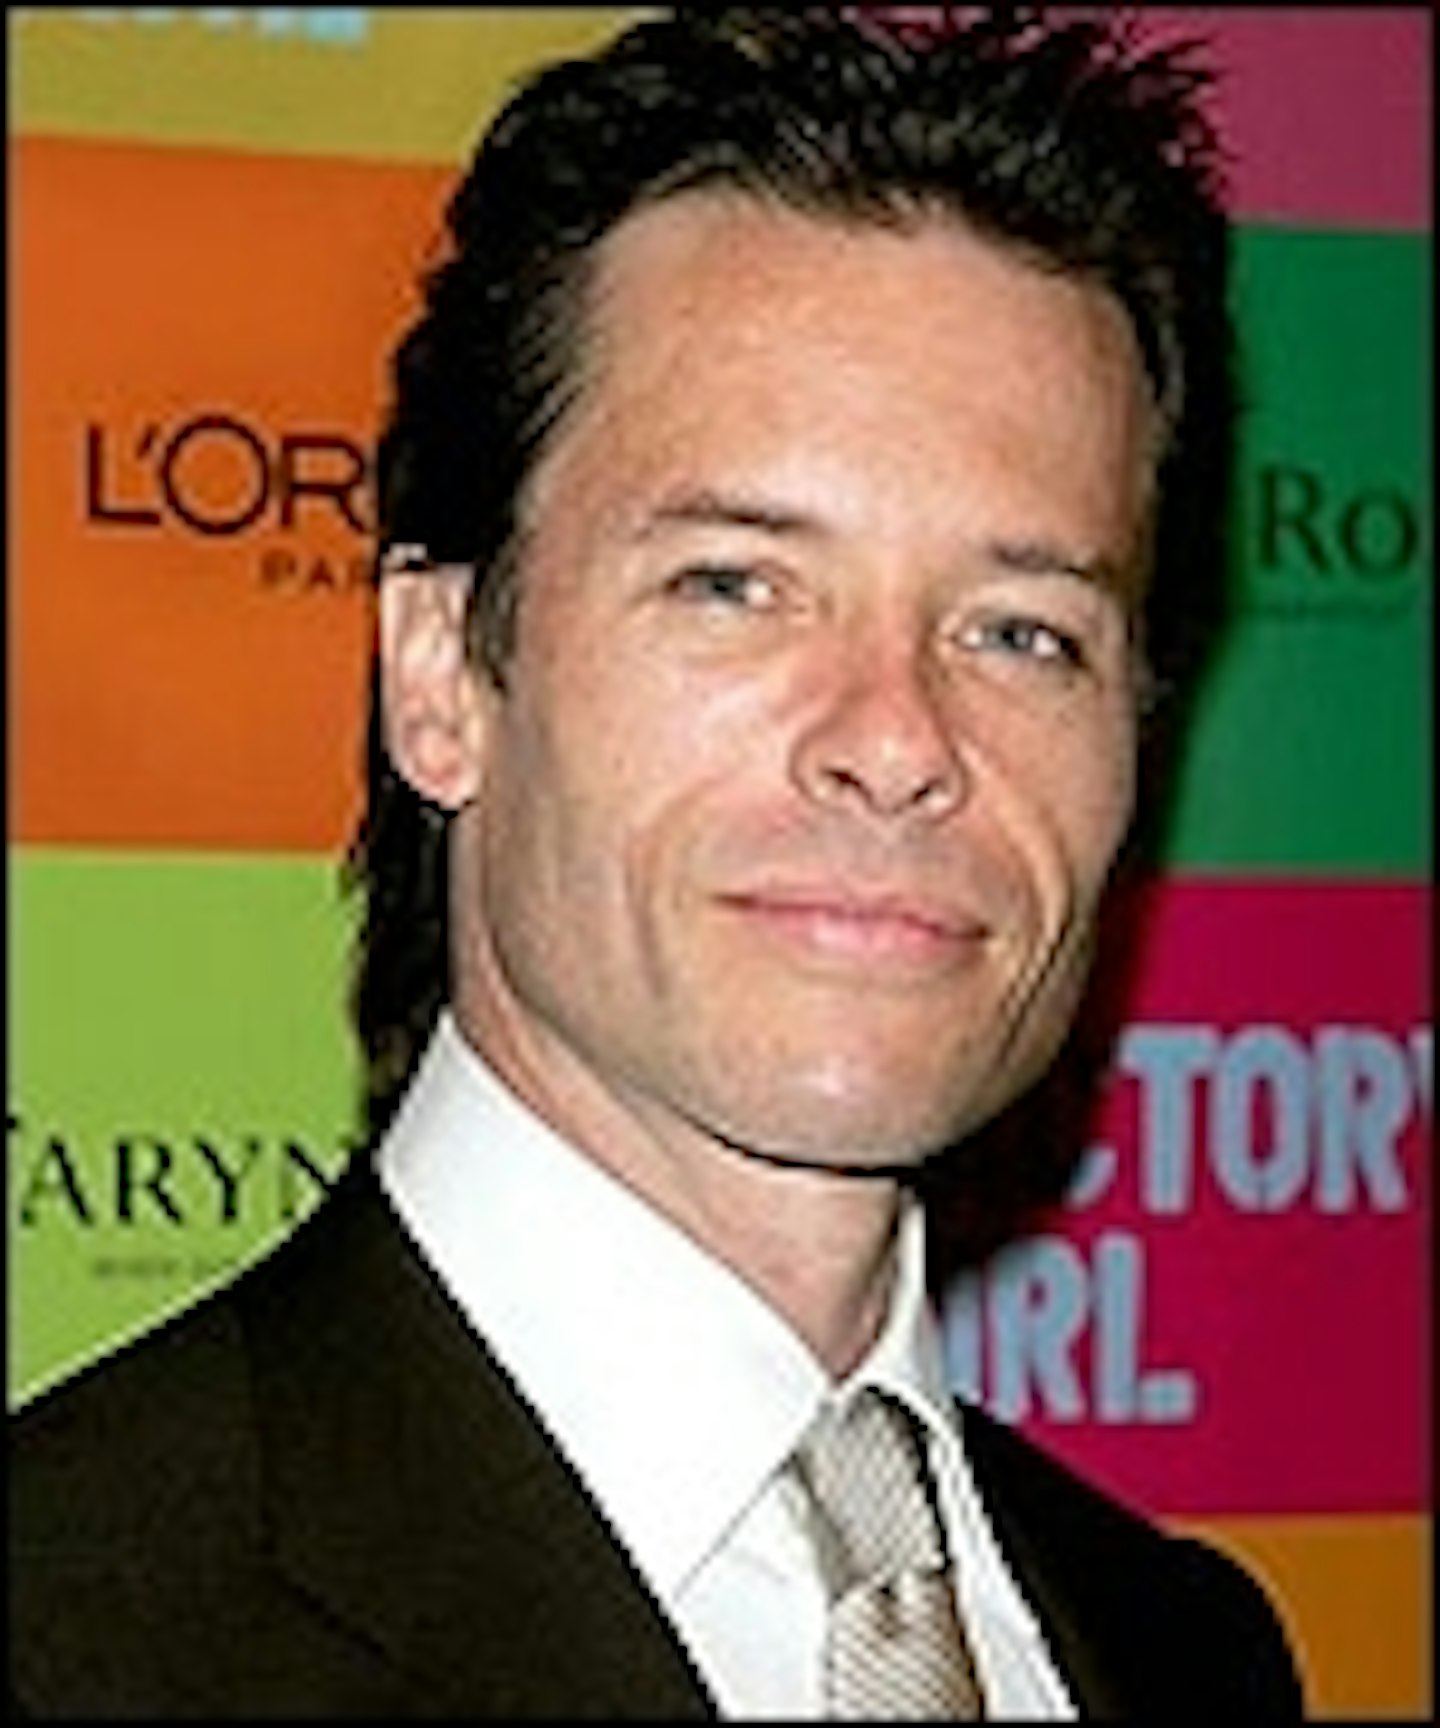 Guy Pearce On The Road?